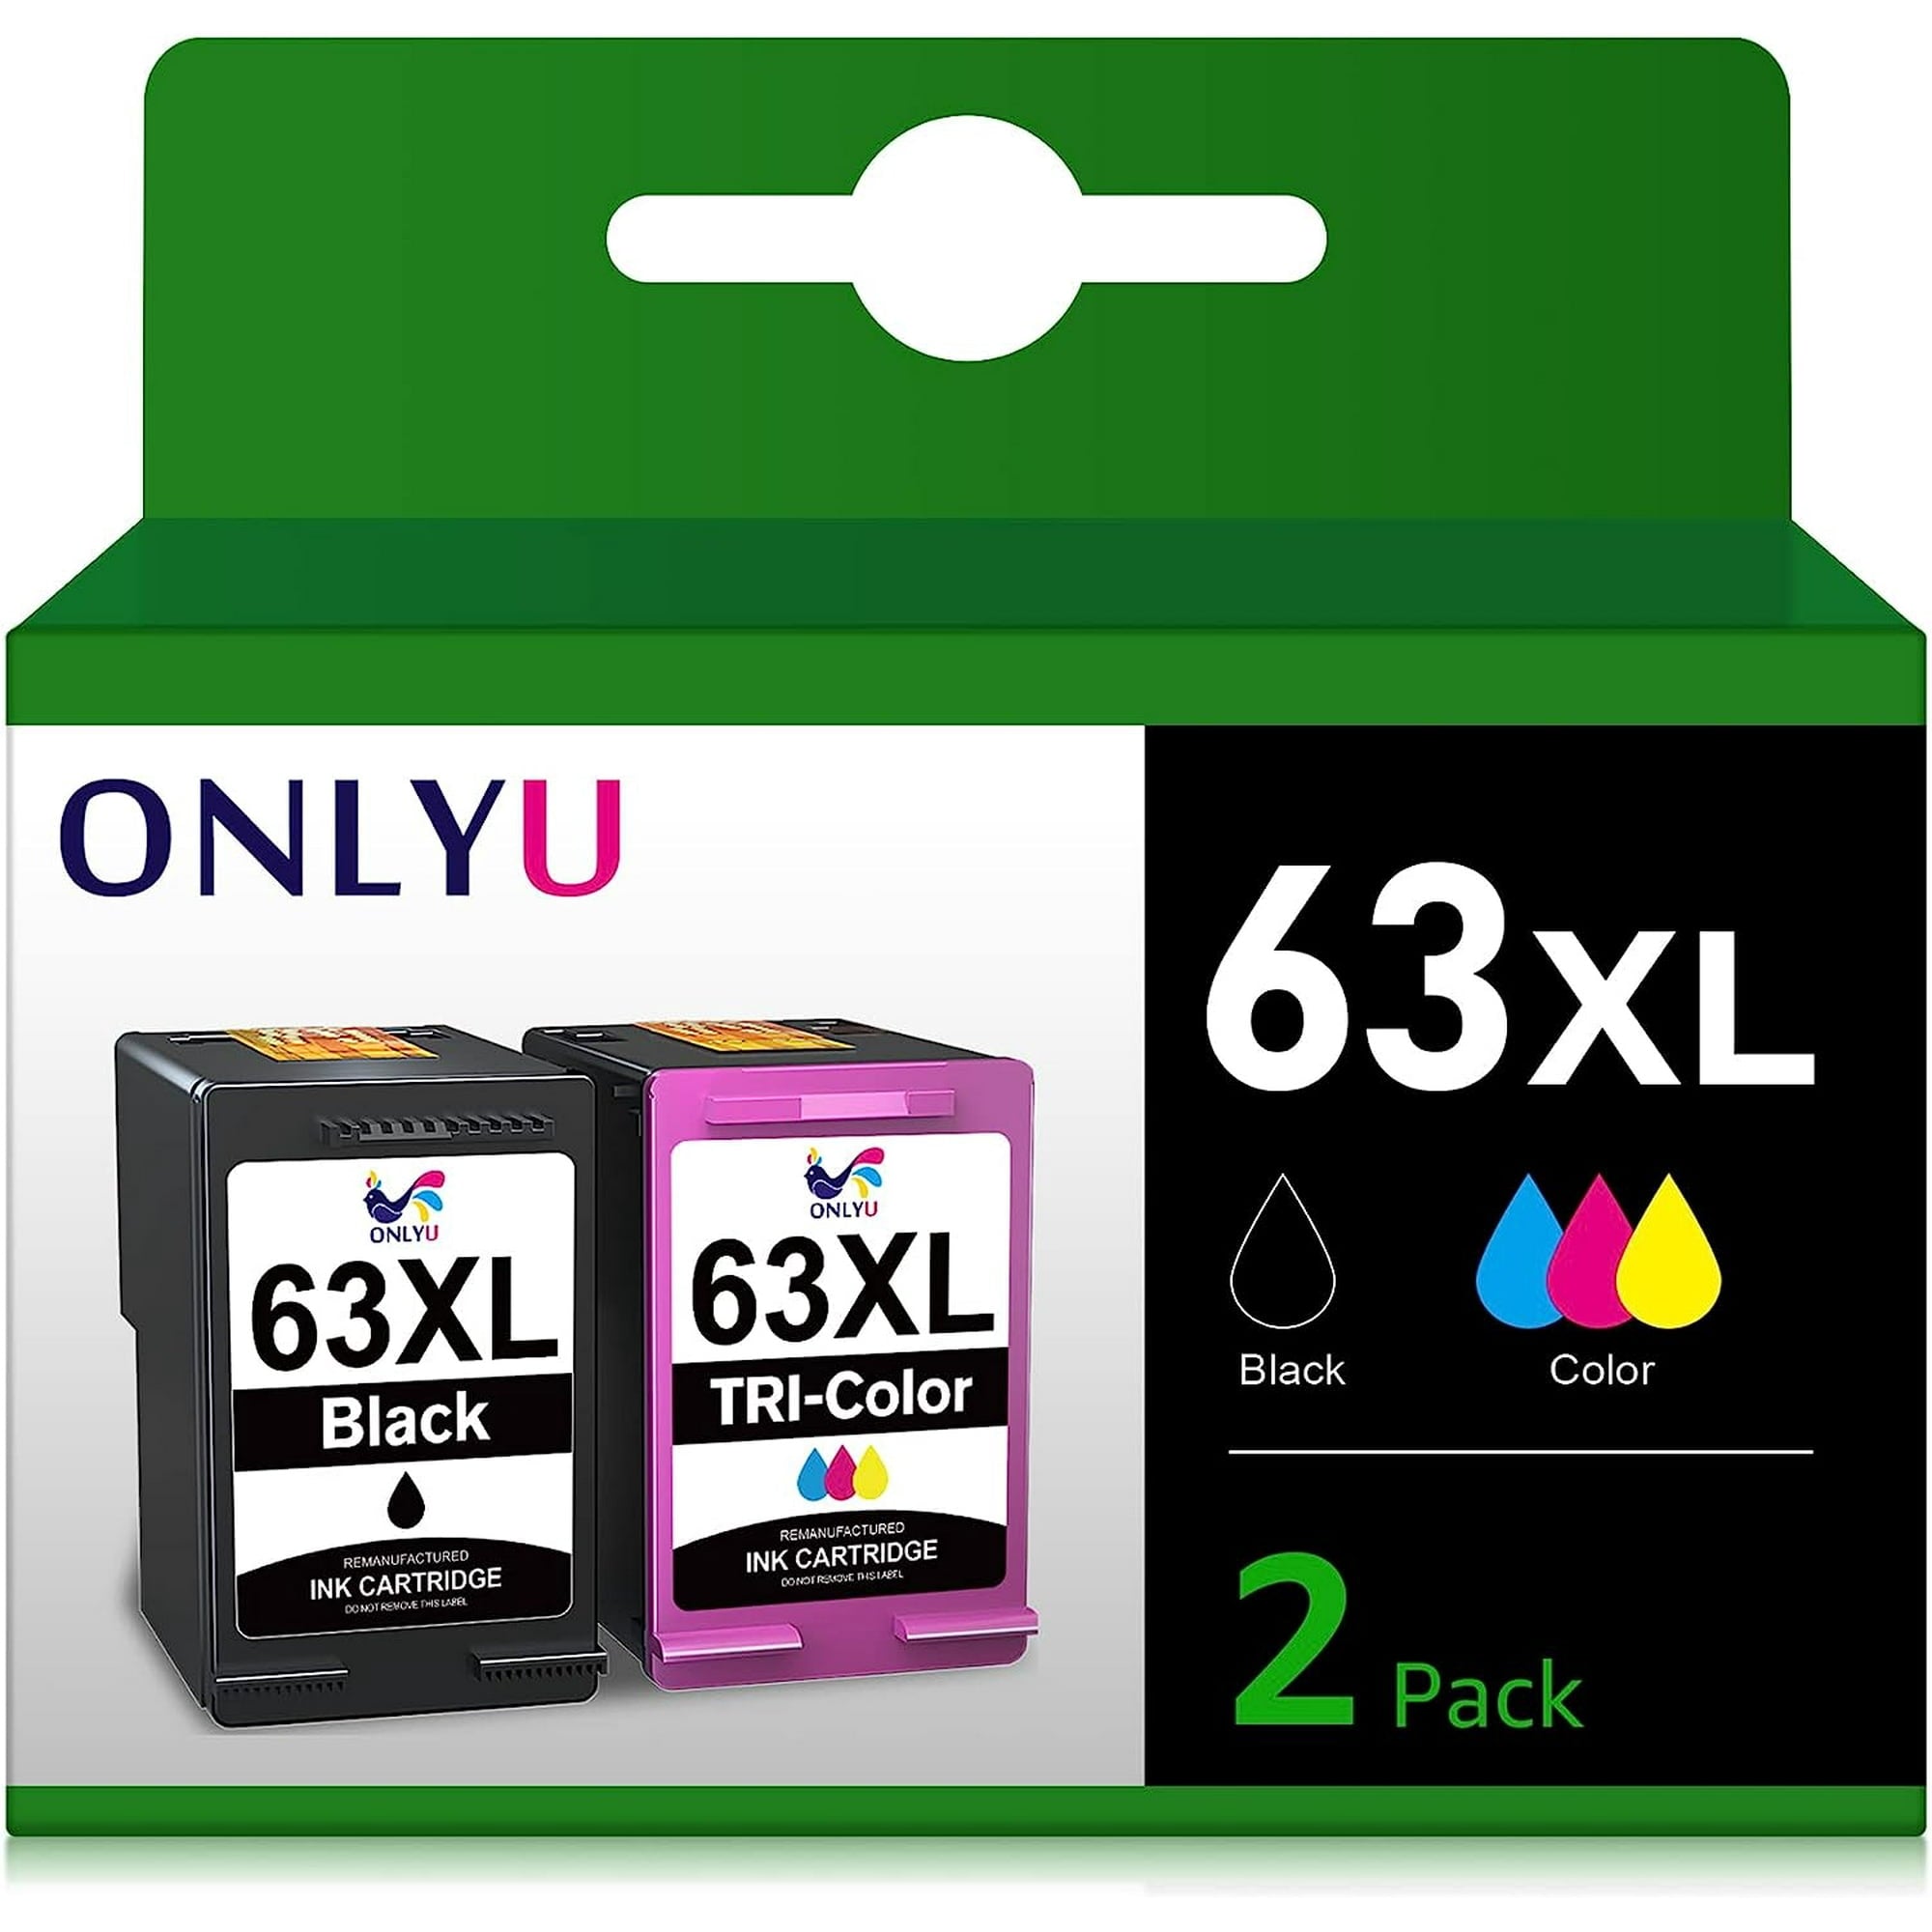 63XL ONLYU 63XL Ink Cartridge Replacement for HP Printer 1 Black 1 Tri-Color